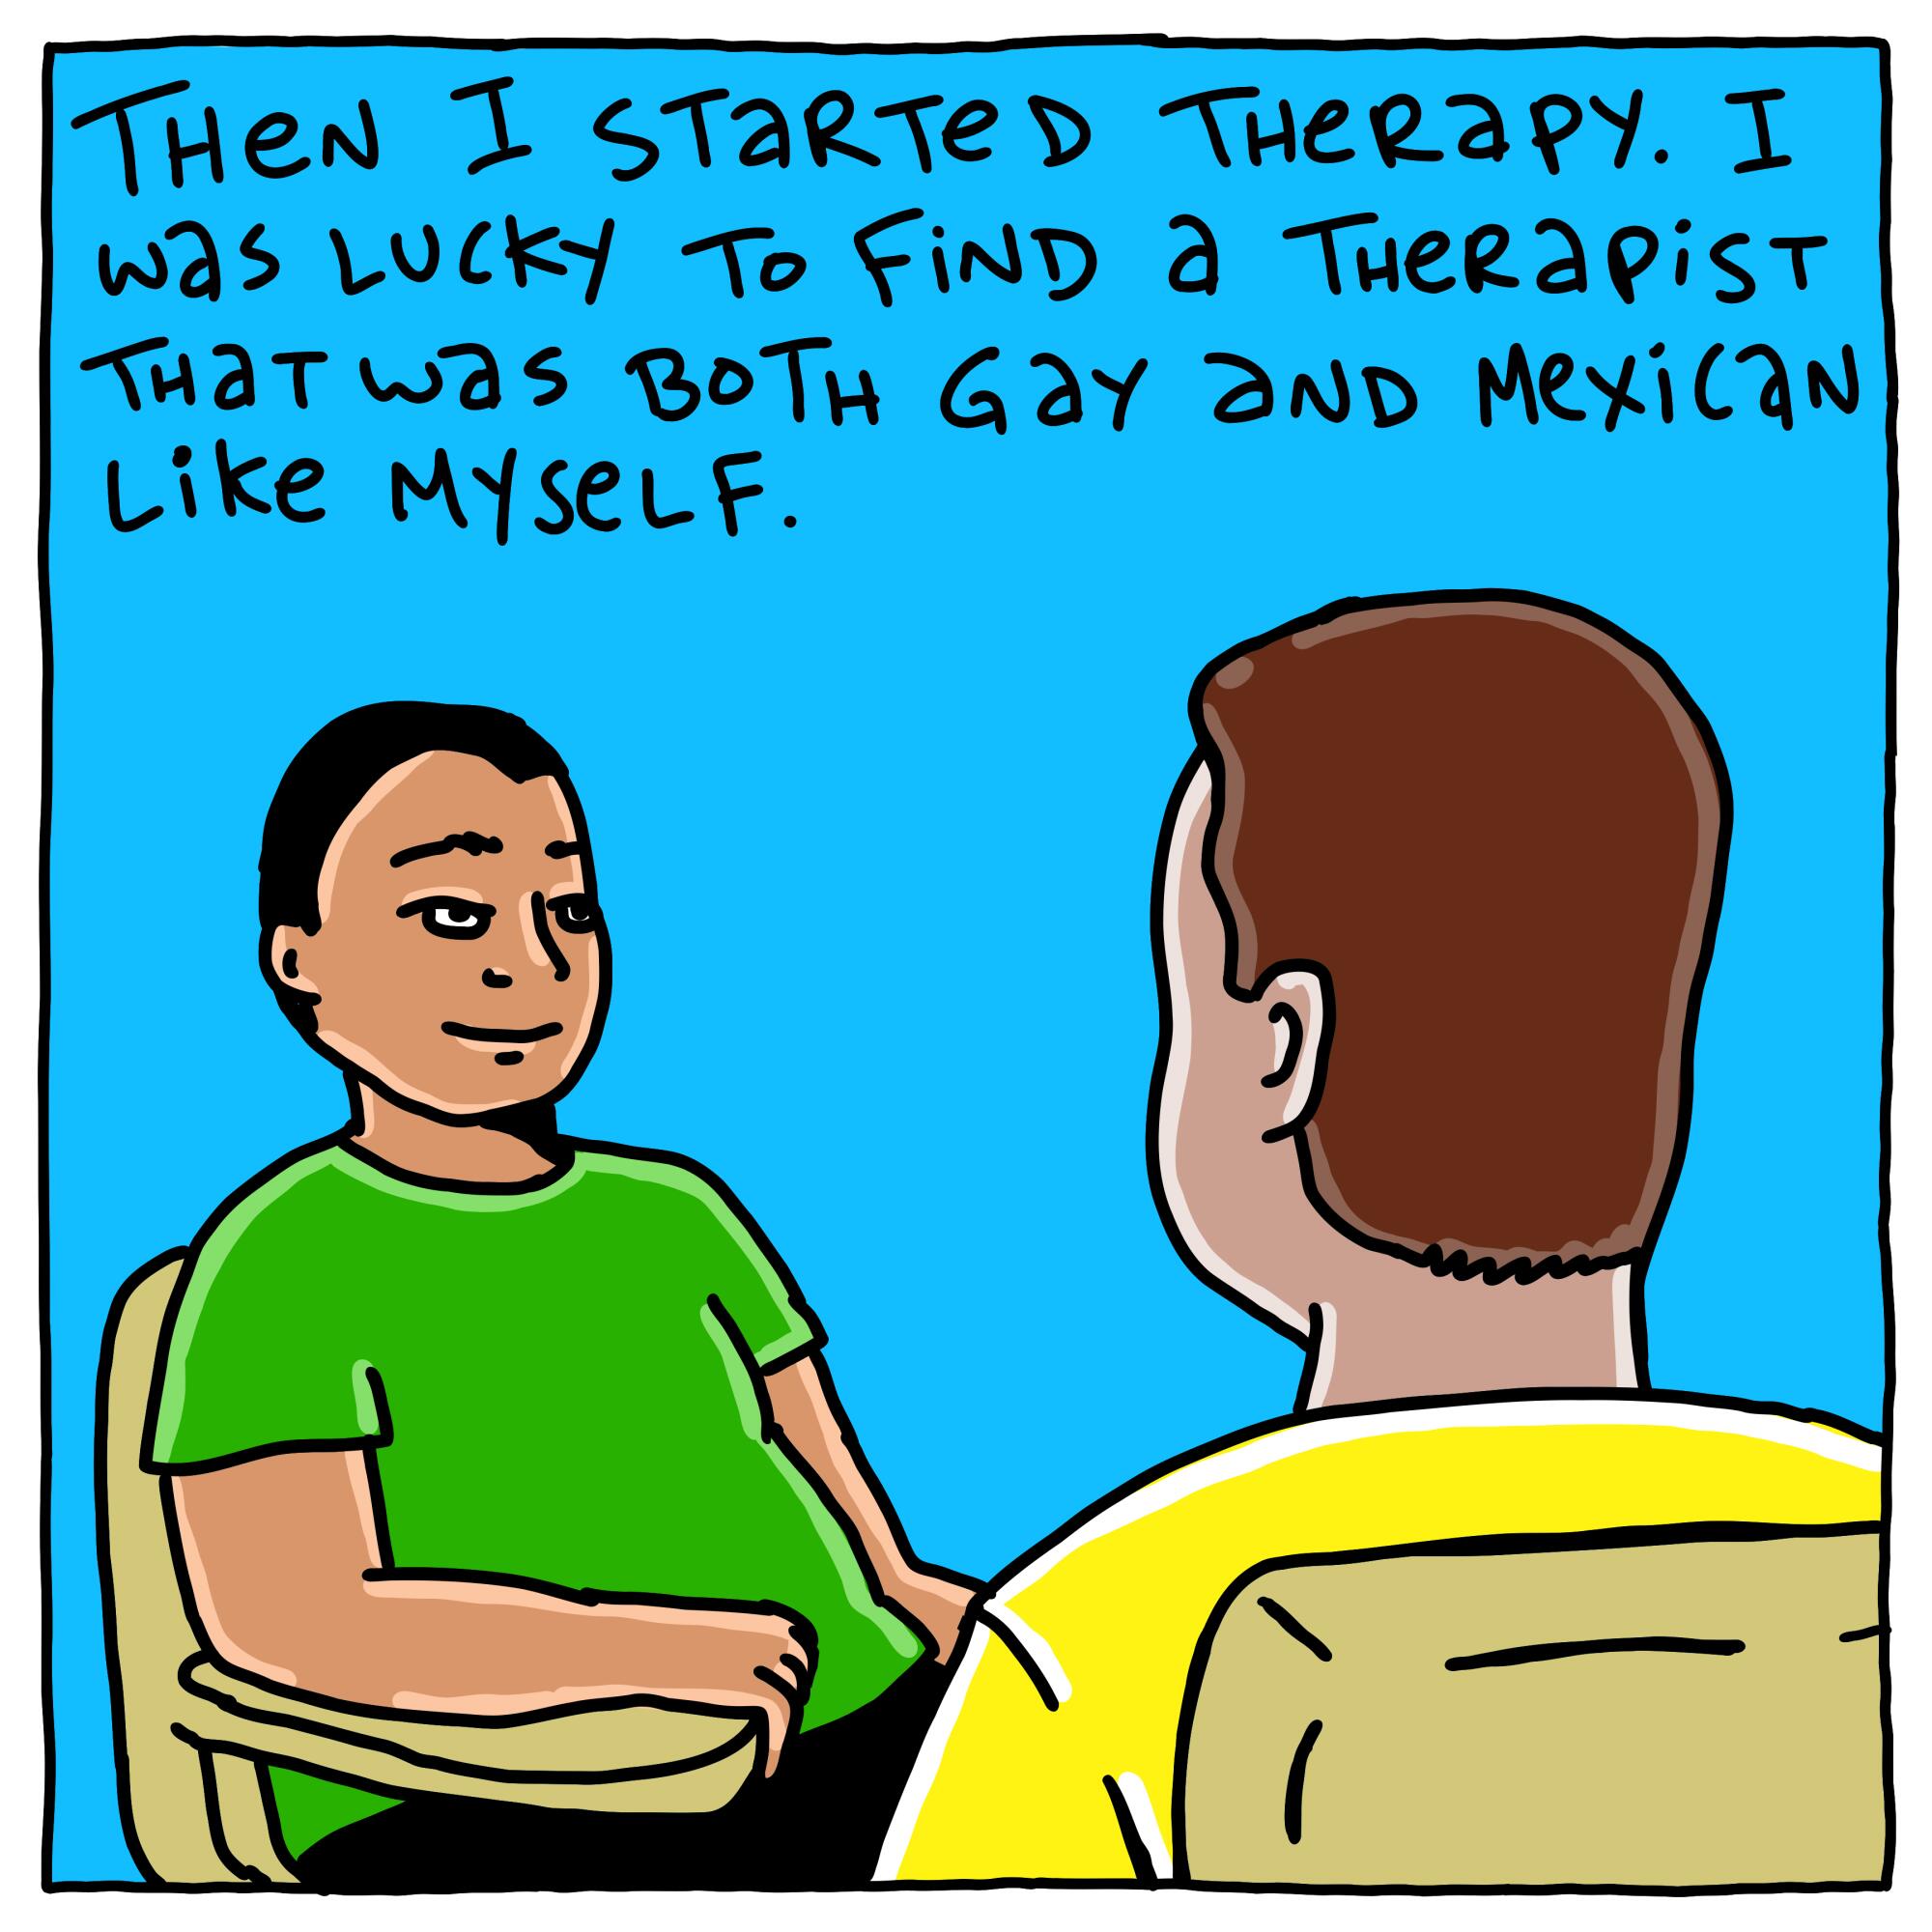 Then I started therapy. I was lucky to find a therapist that was both gay and Mexican like myself. 